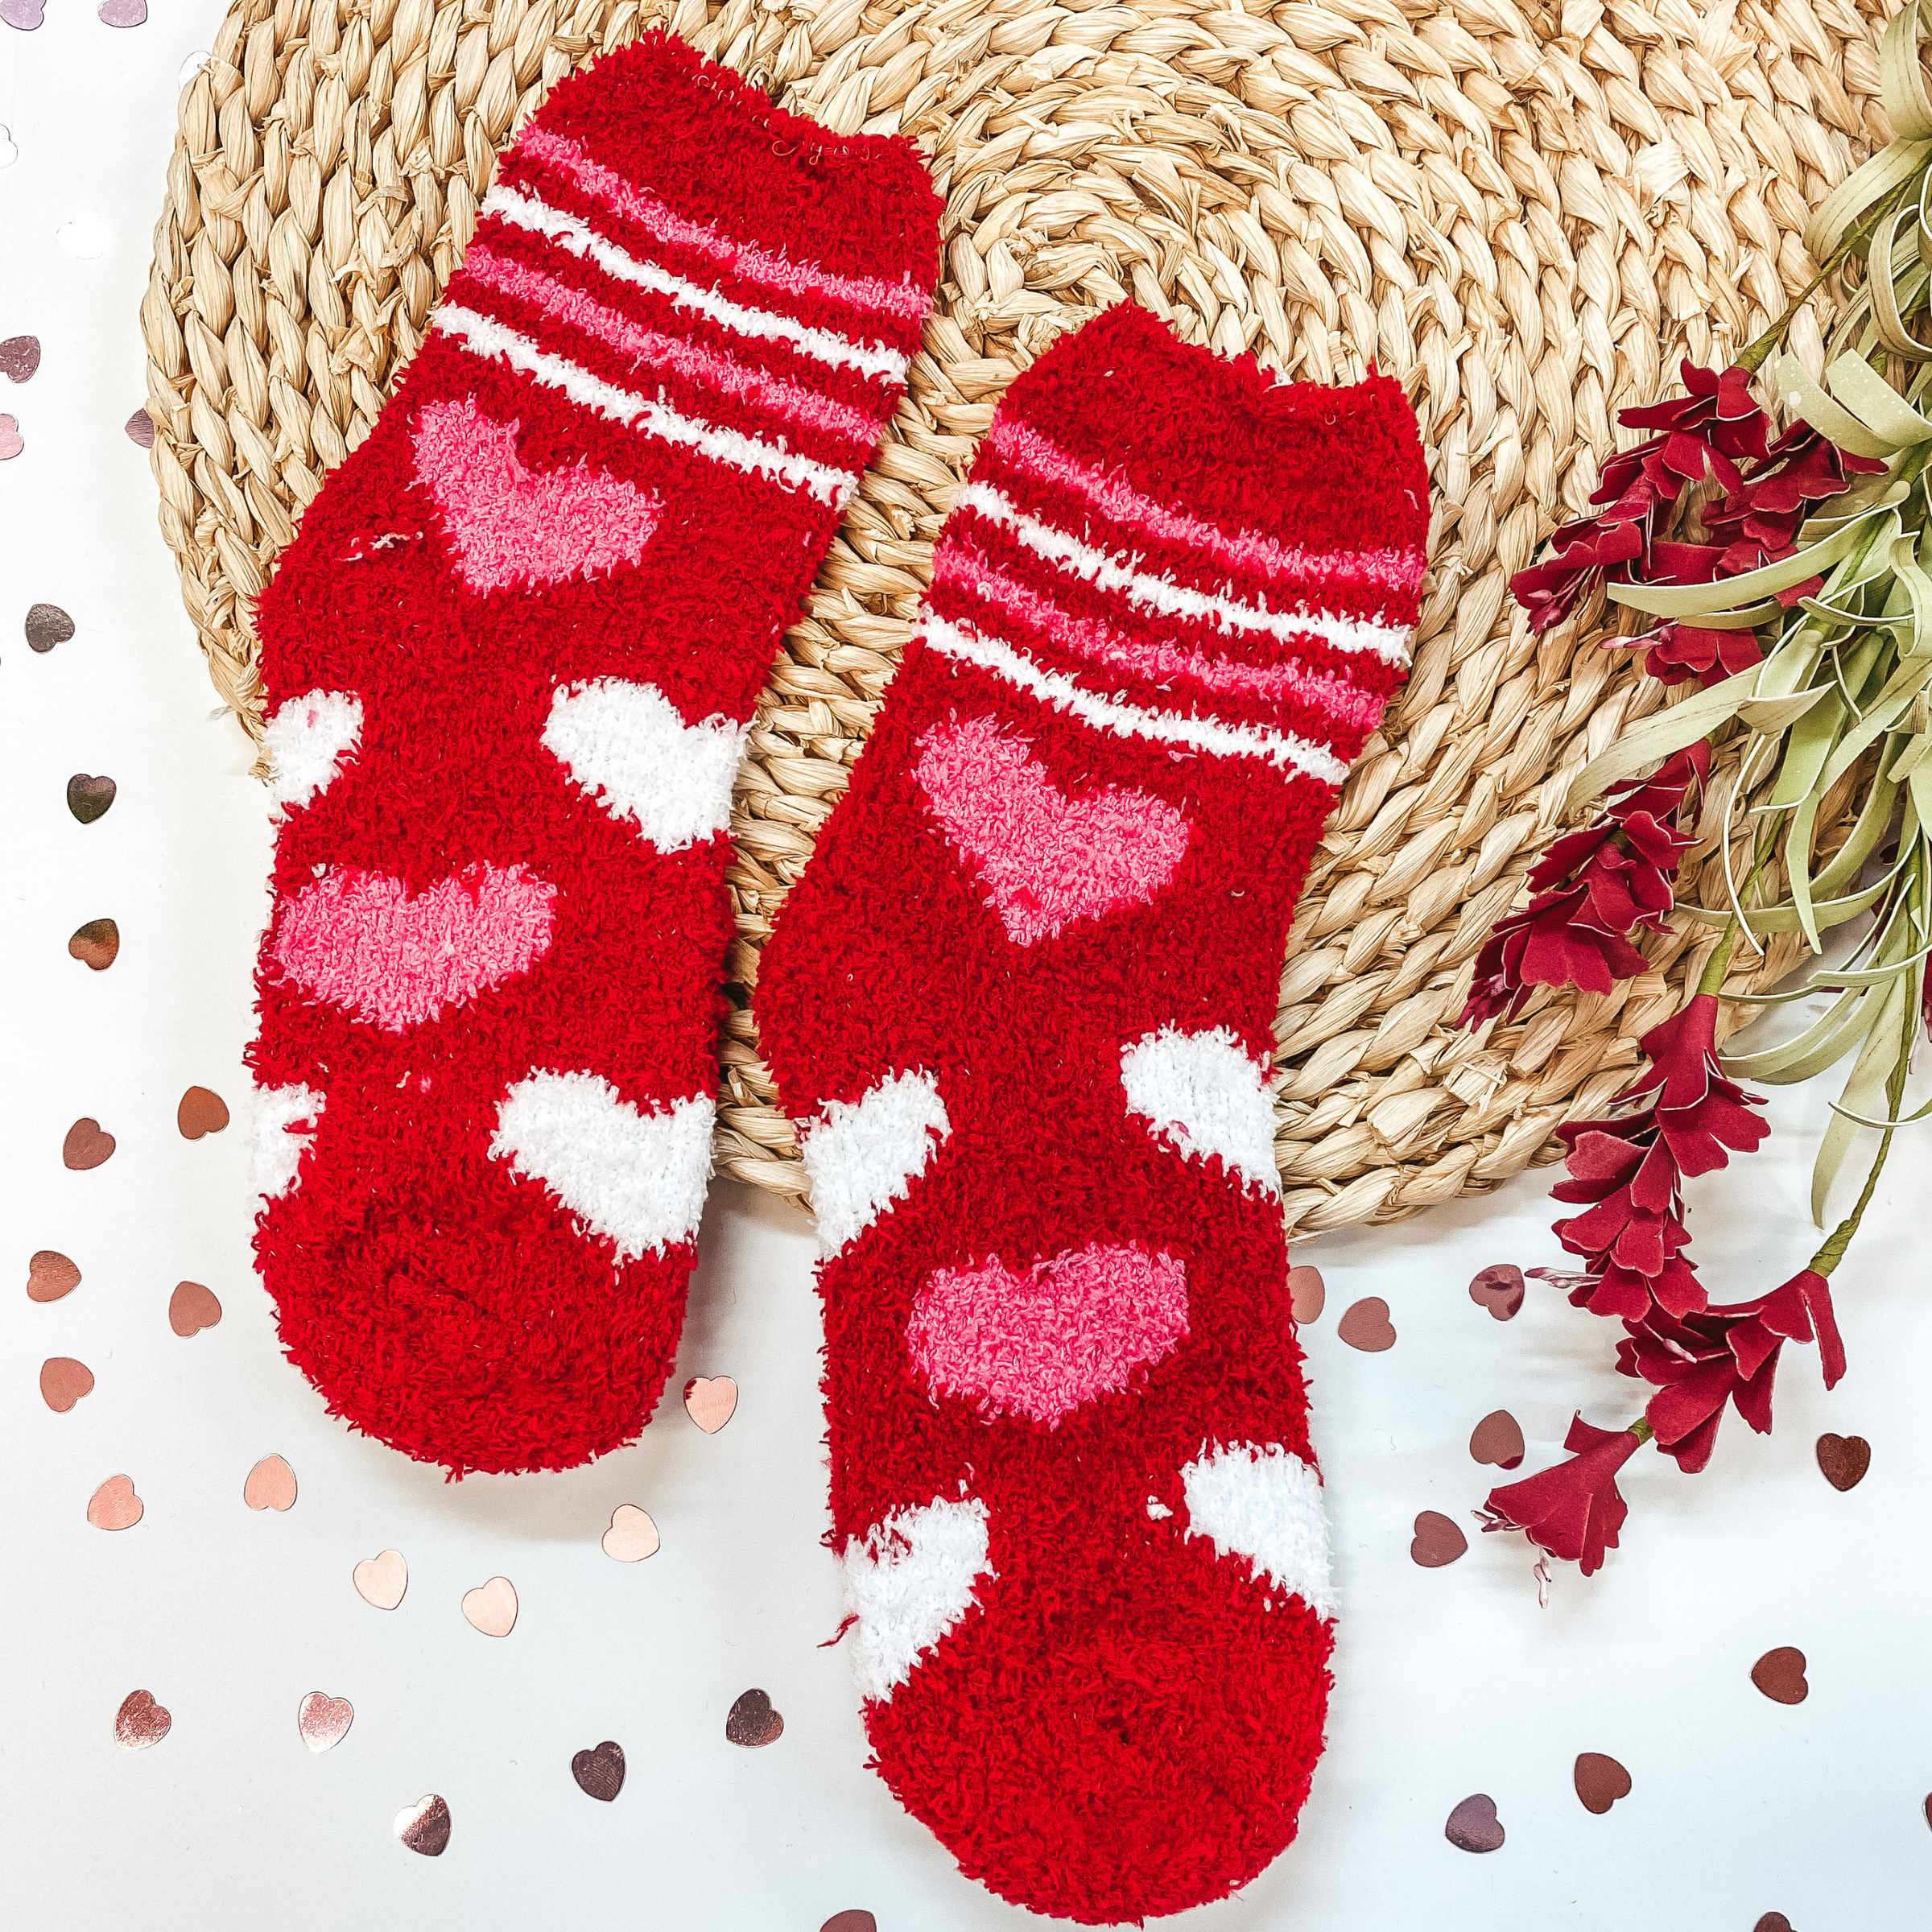 Valentine's Socks | My Heart is Yours Microfiber Socks in Assorted Colors - Giddy Up Glamour Boutique